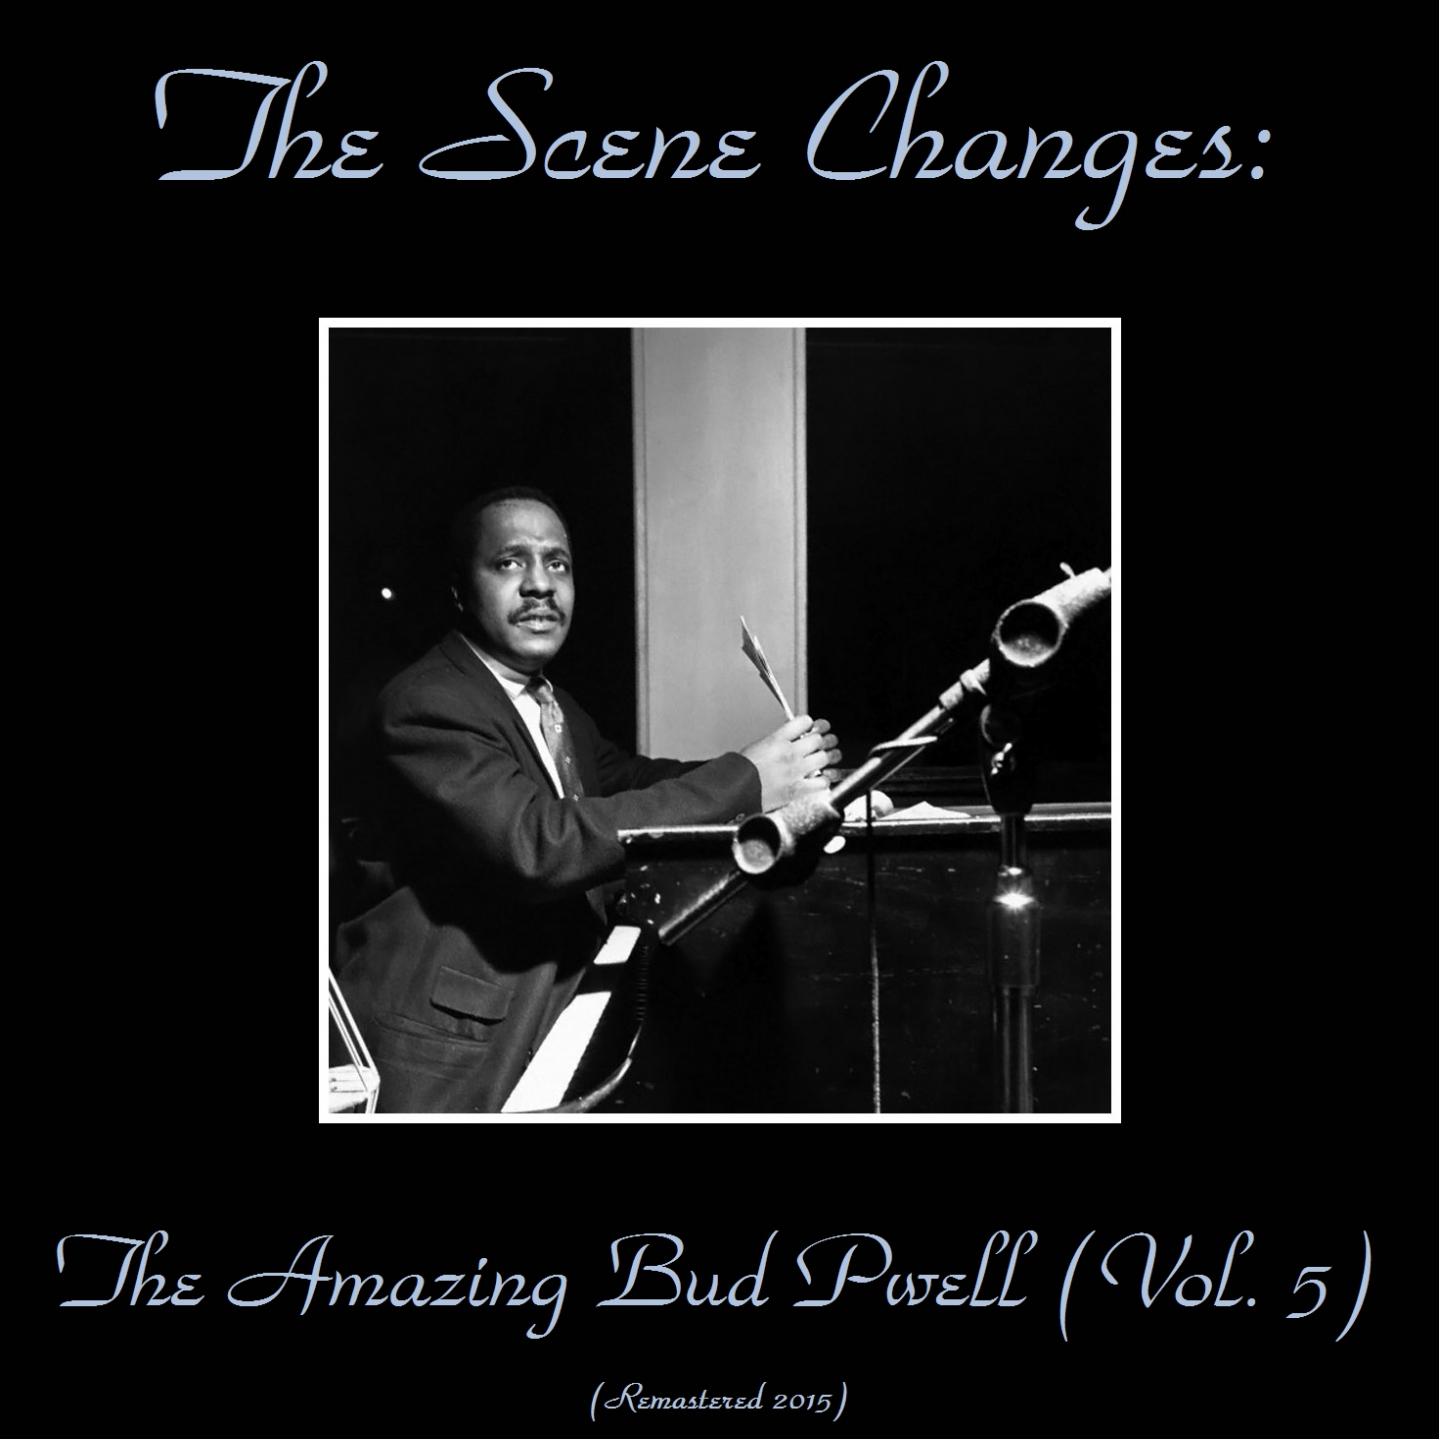 The Scene Changes: The Amazing Bud Powell (Vol. 5) (Remastered 2015)